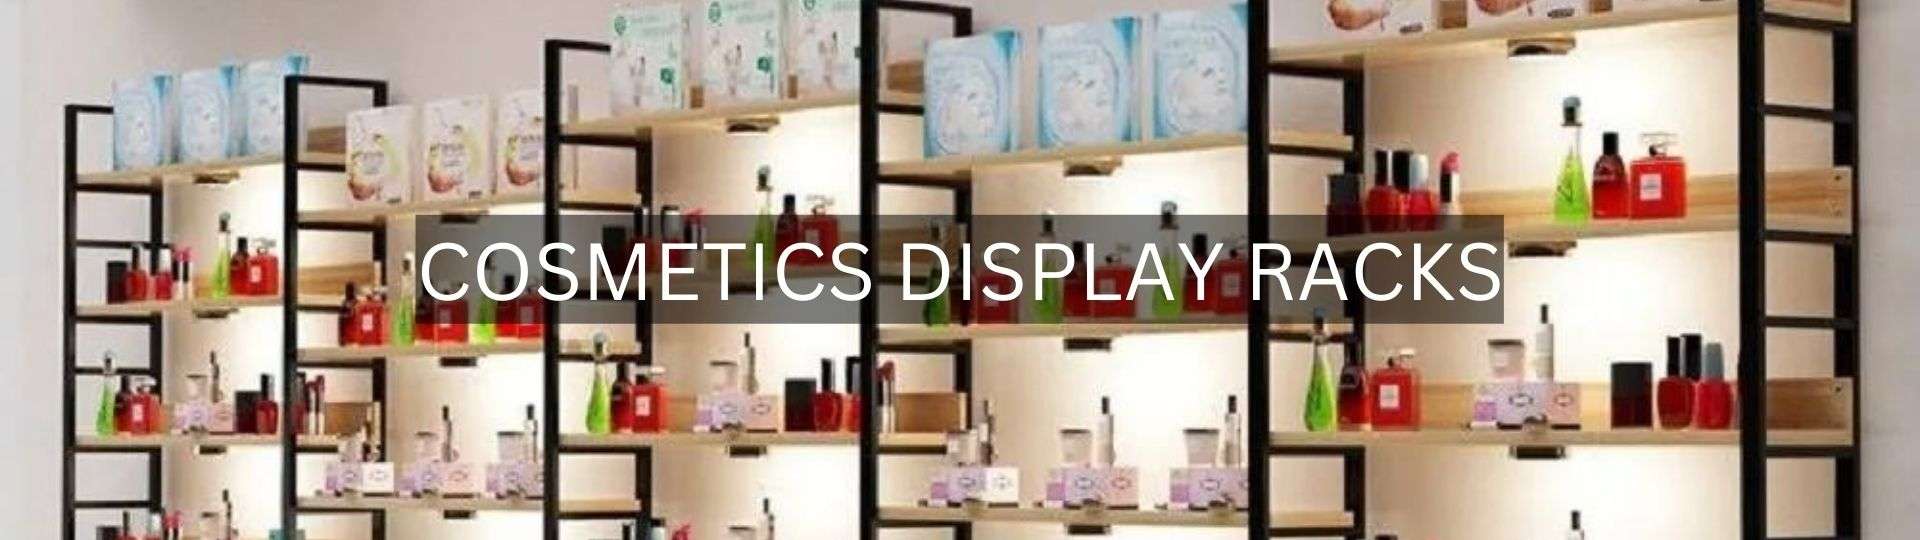 Latest Cosmetic Display Racks For Shops at Best Price in Haryana